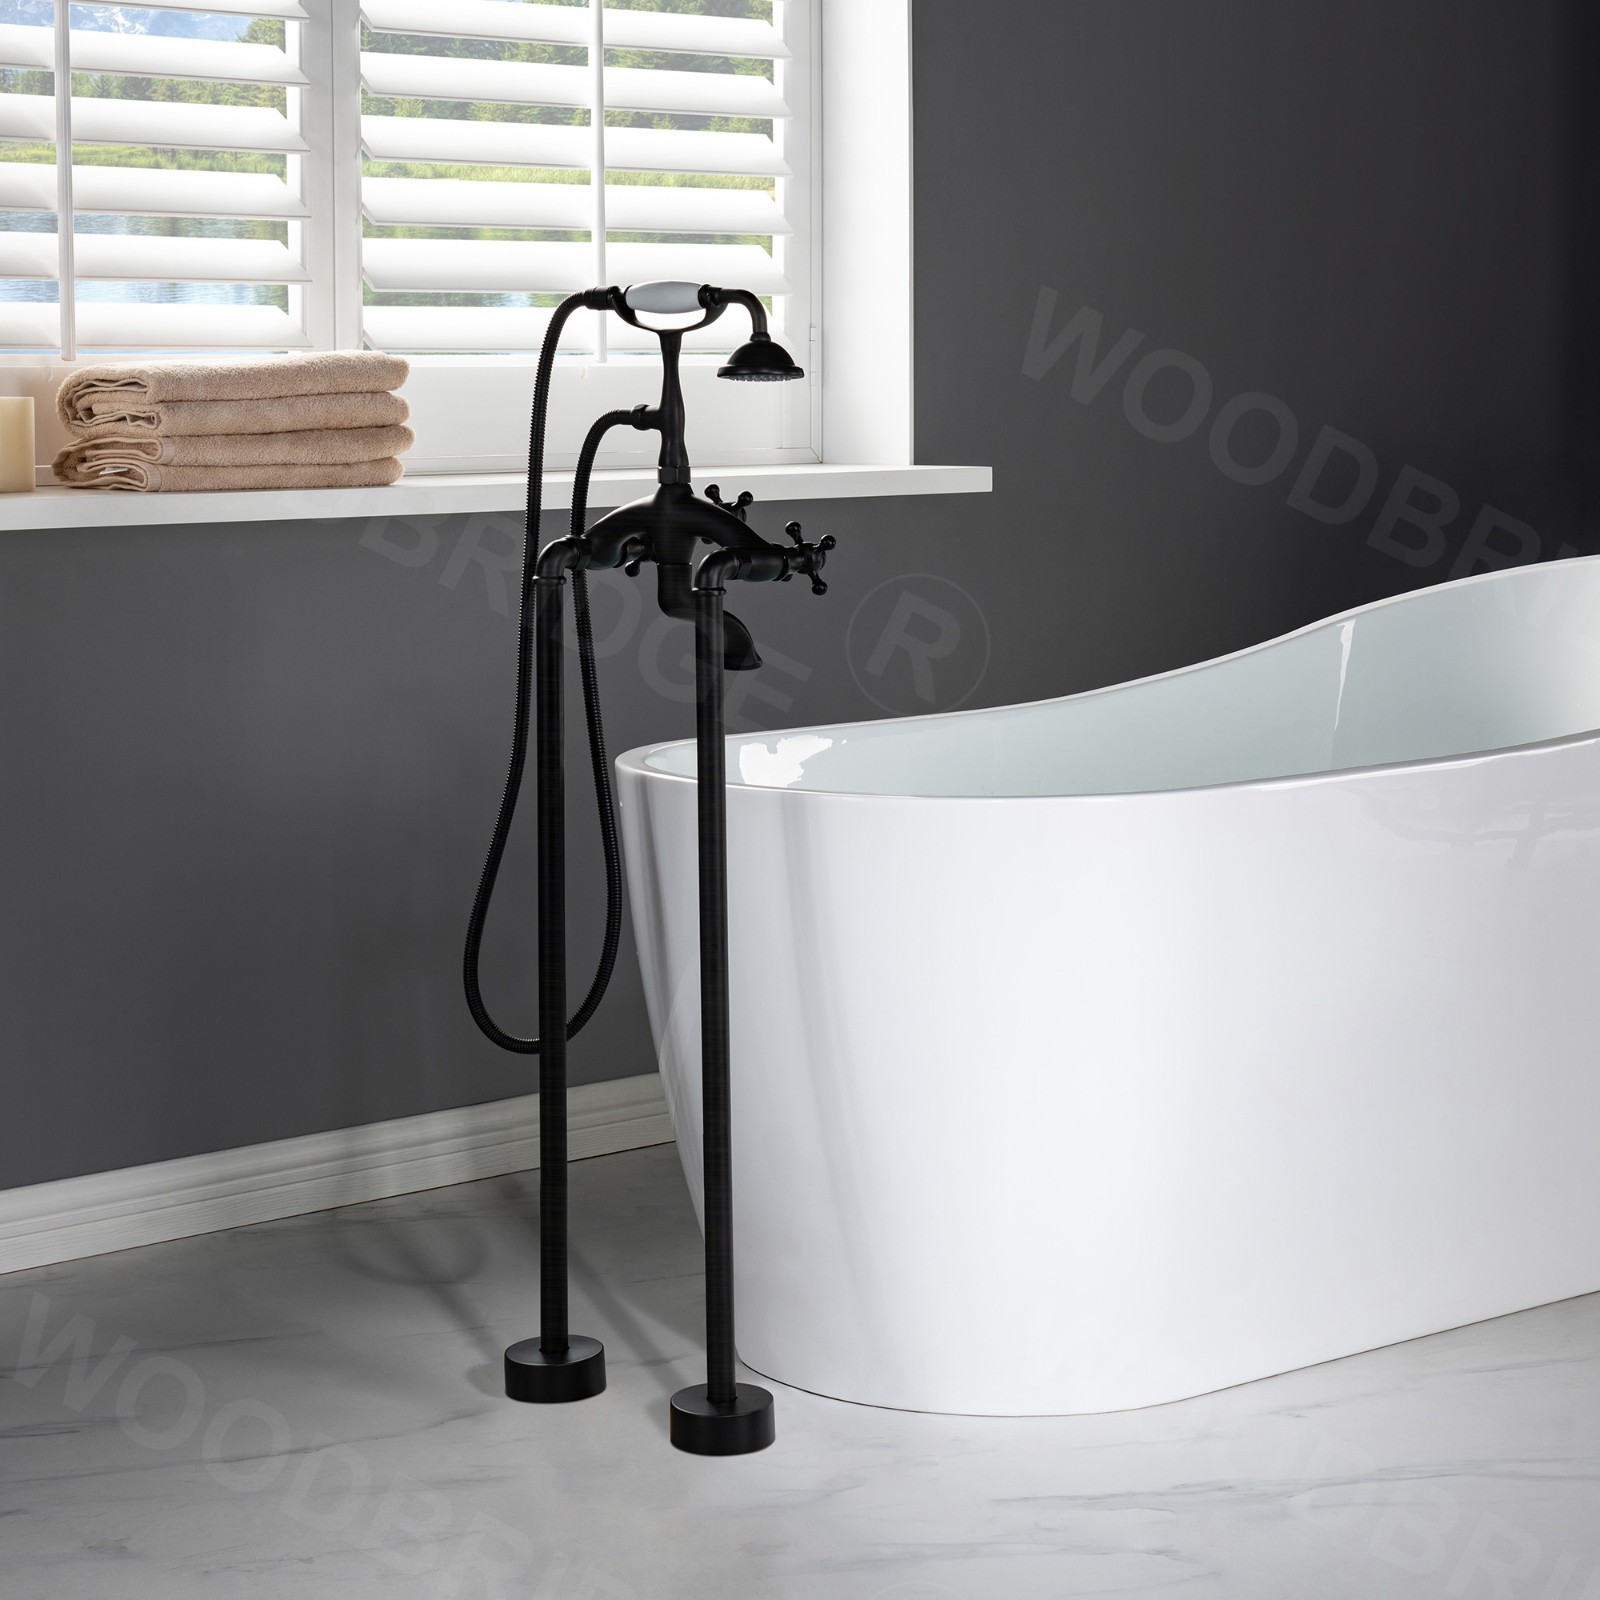  WOODBRIDGE F0029ORB Freestanding Clawfoot Tub Filler Faucet with Hand Shower and Hose in Oil Rubbed Bronze_4558